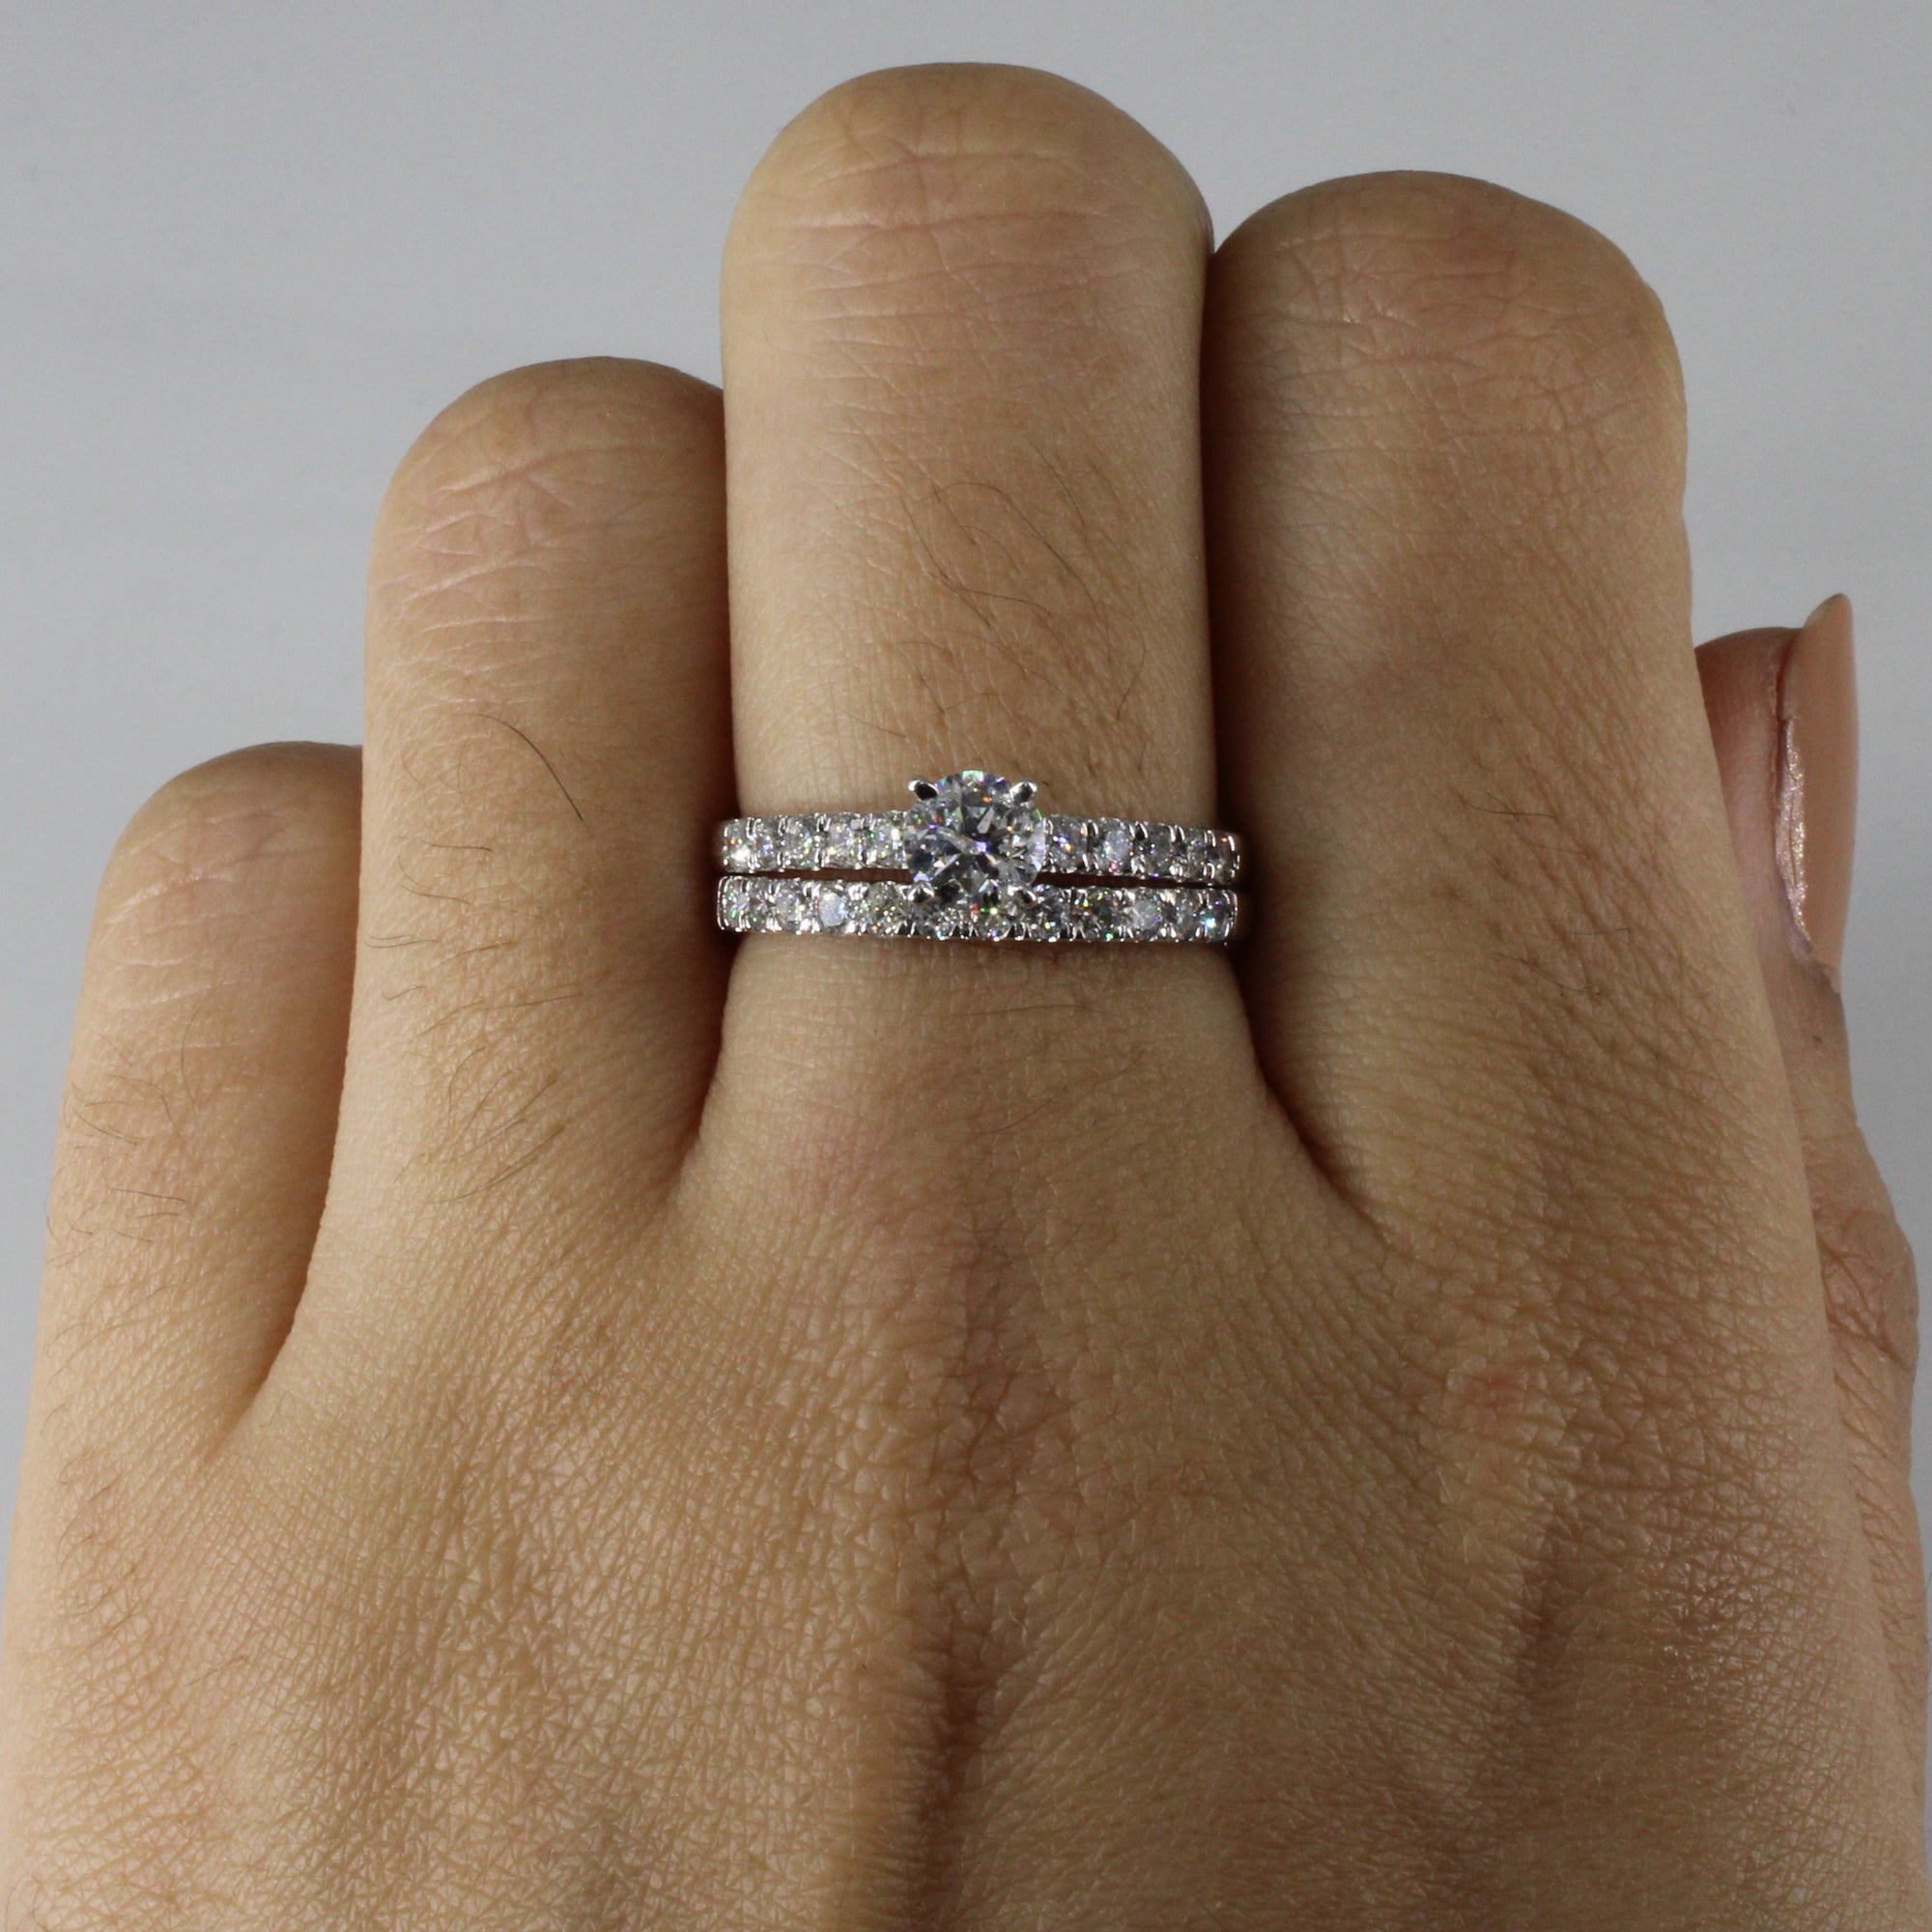 Solitaire with Accents Diamond Engagement Ring Set | 1.06ctw I2 F Canadian Diamond | SZ 7 |